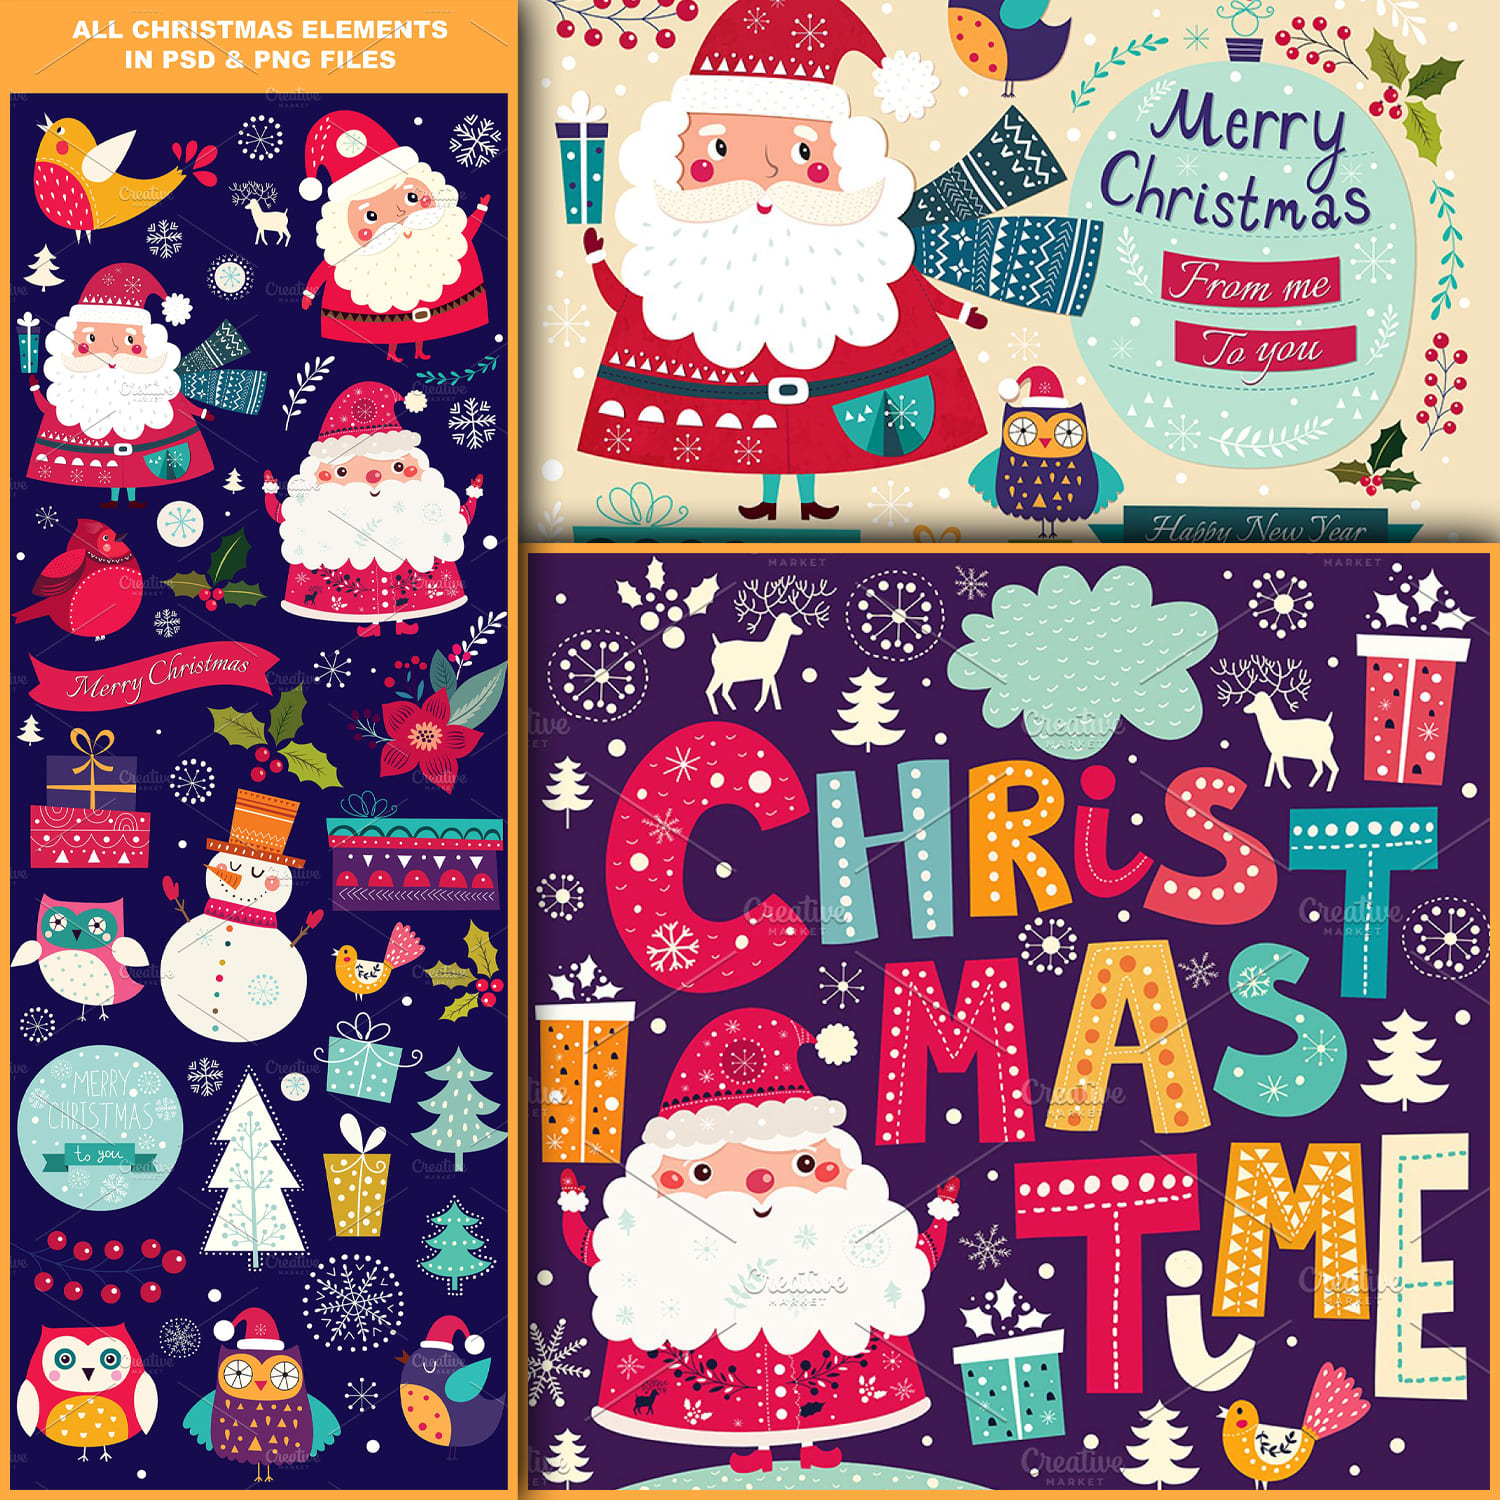 Illustrations with Santa Claus cover.